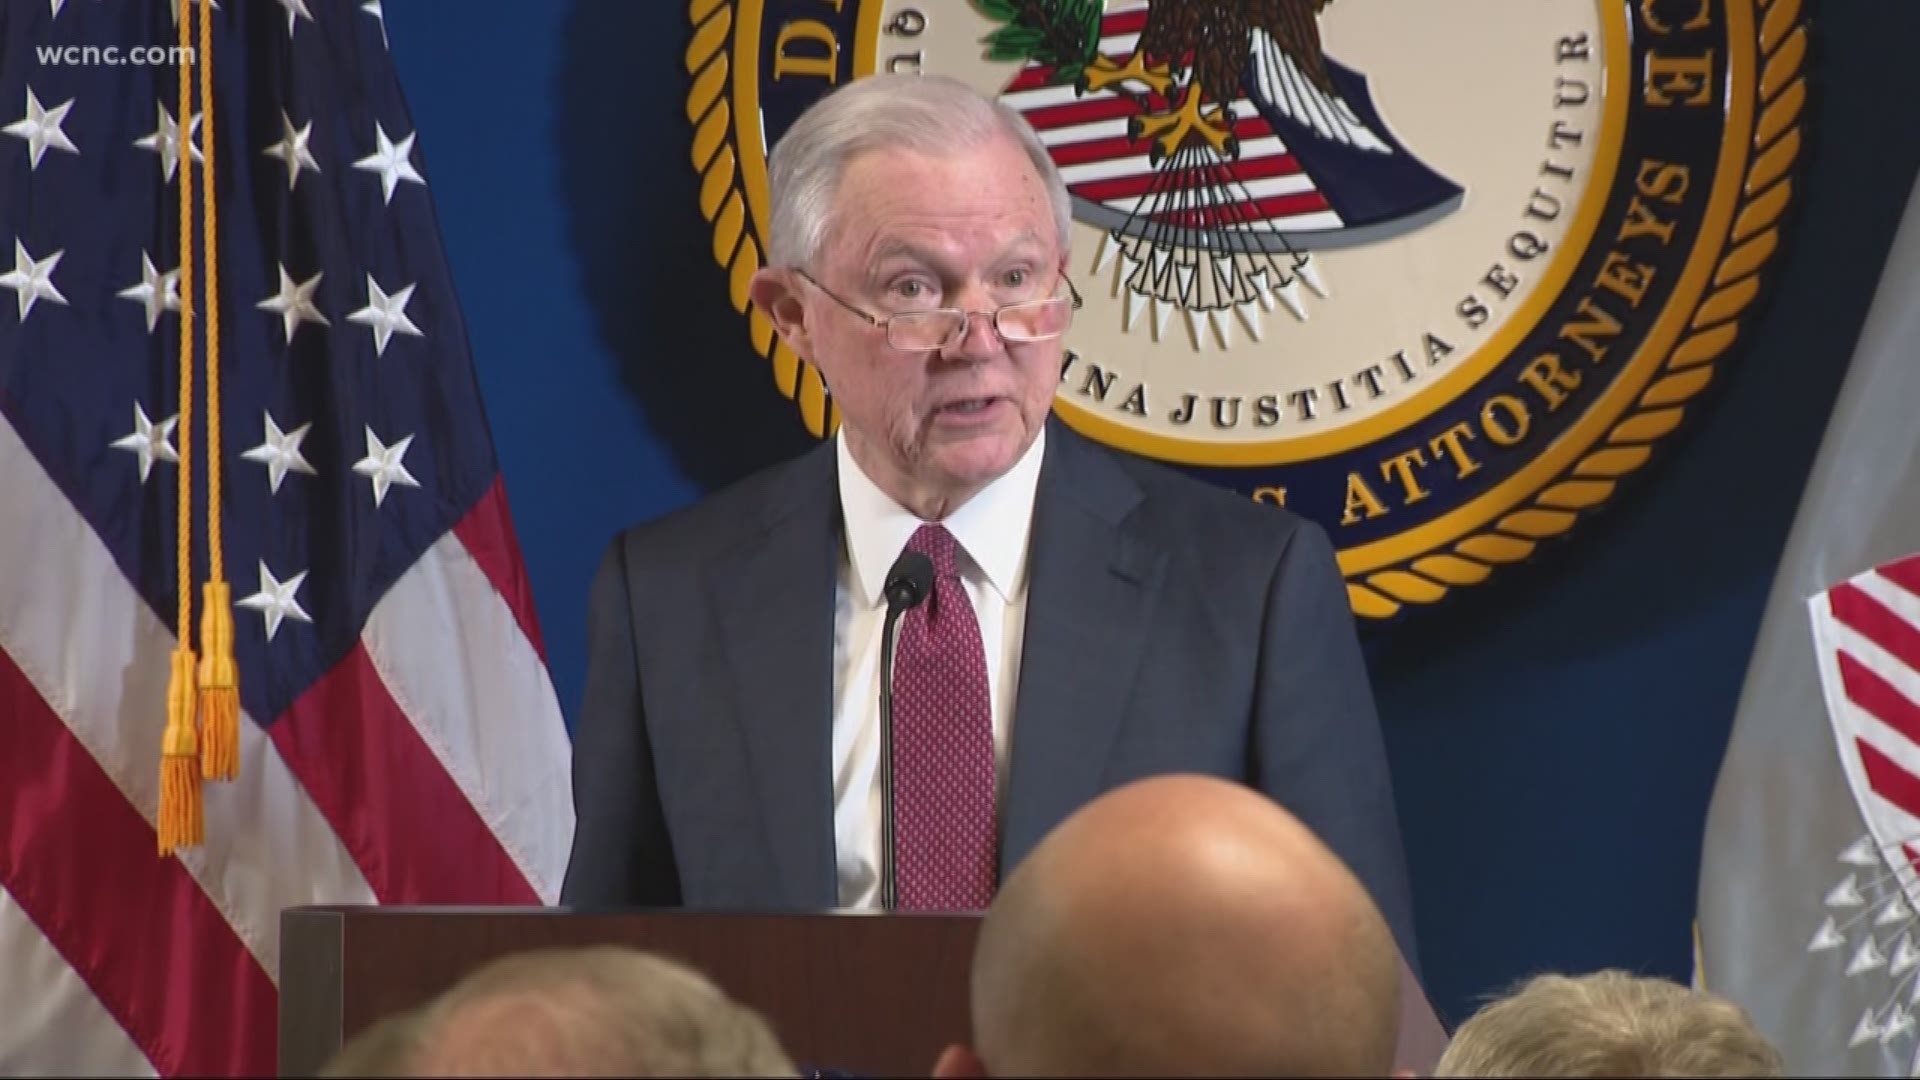 Speaking in uptown Tuesday morning, Attorney General Jeff Sessions announced a Violent Crime Task Force will be created in Charlotte.